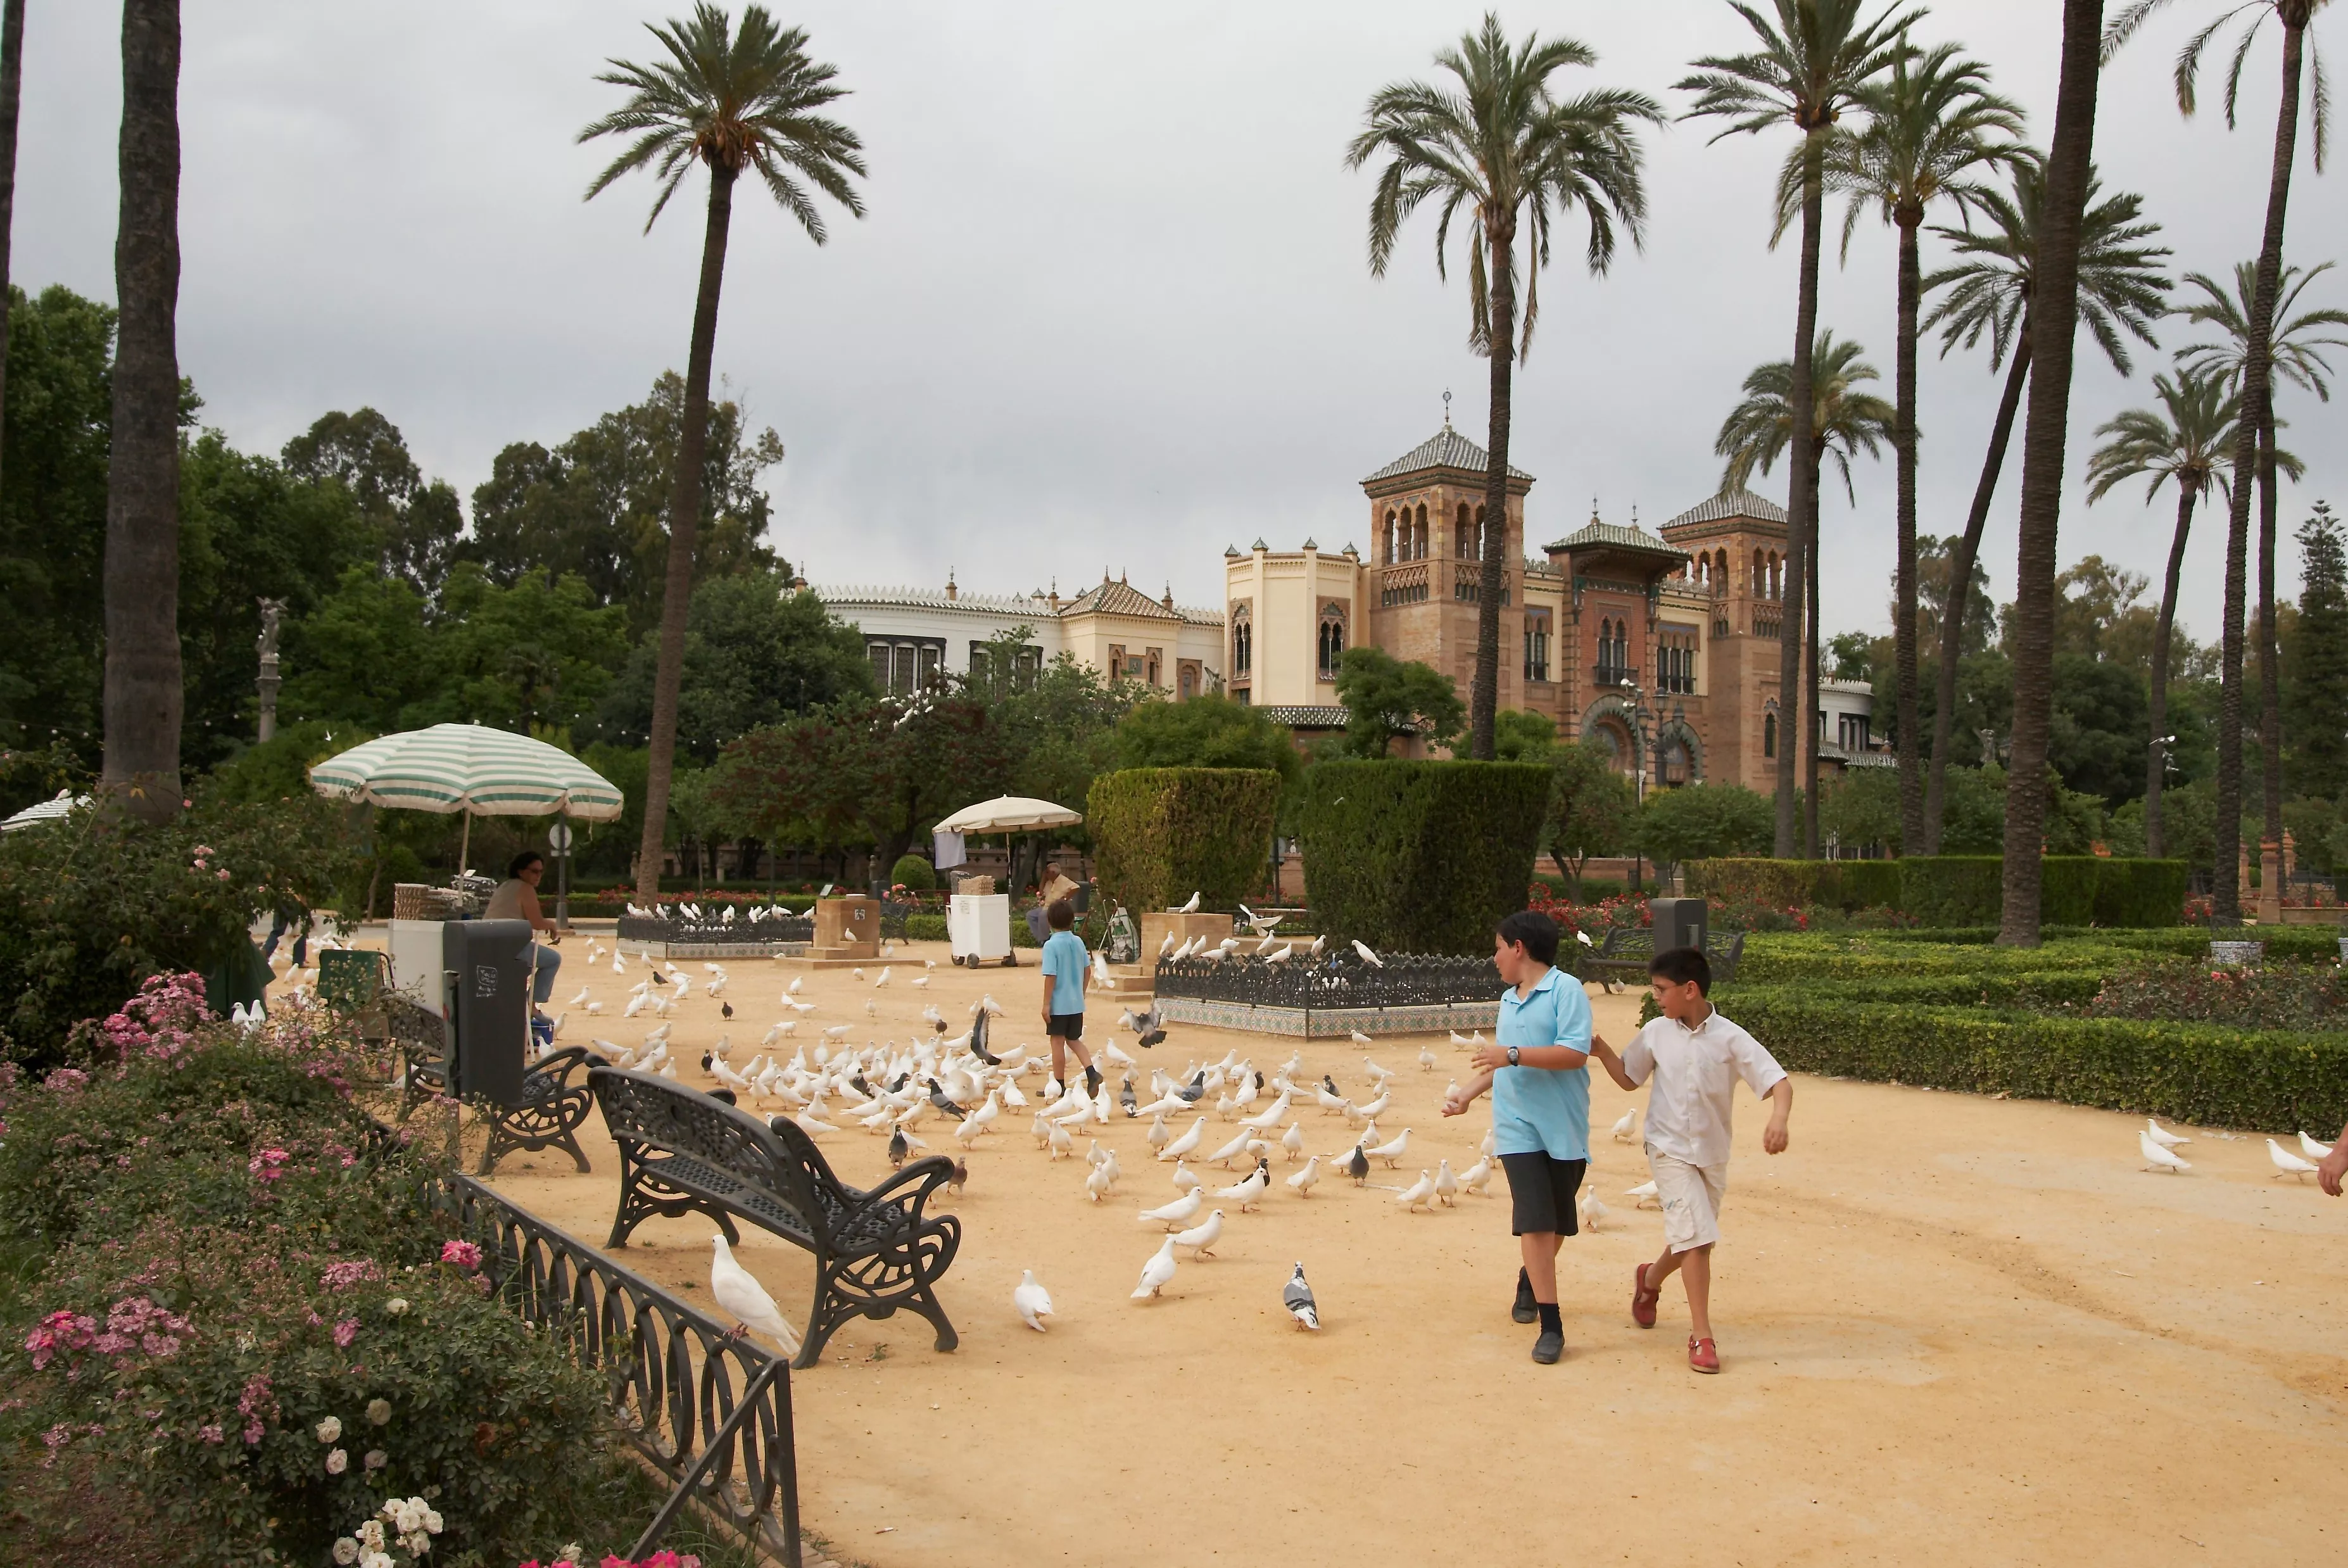 Plaza America in Spain, Europe | Parks - Rated 3.7